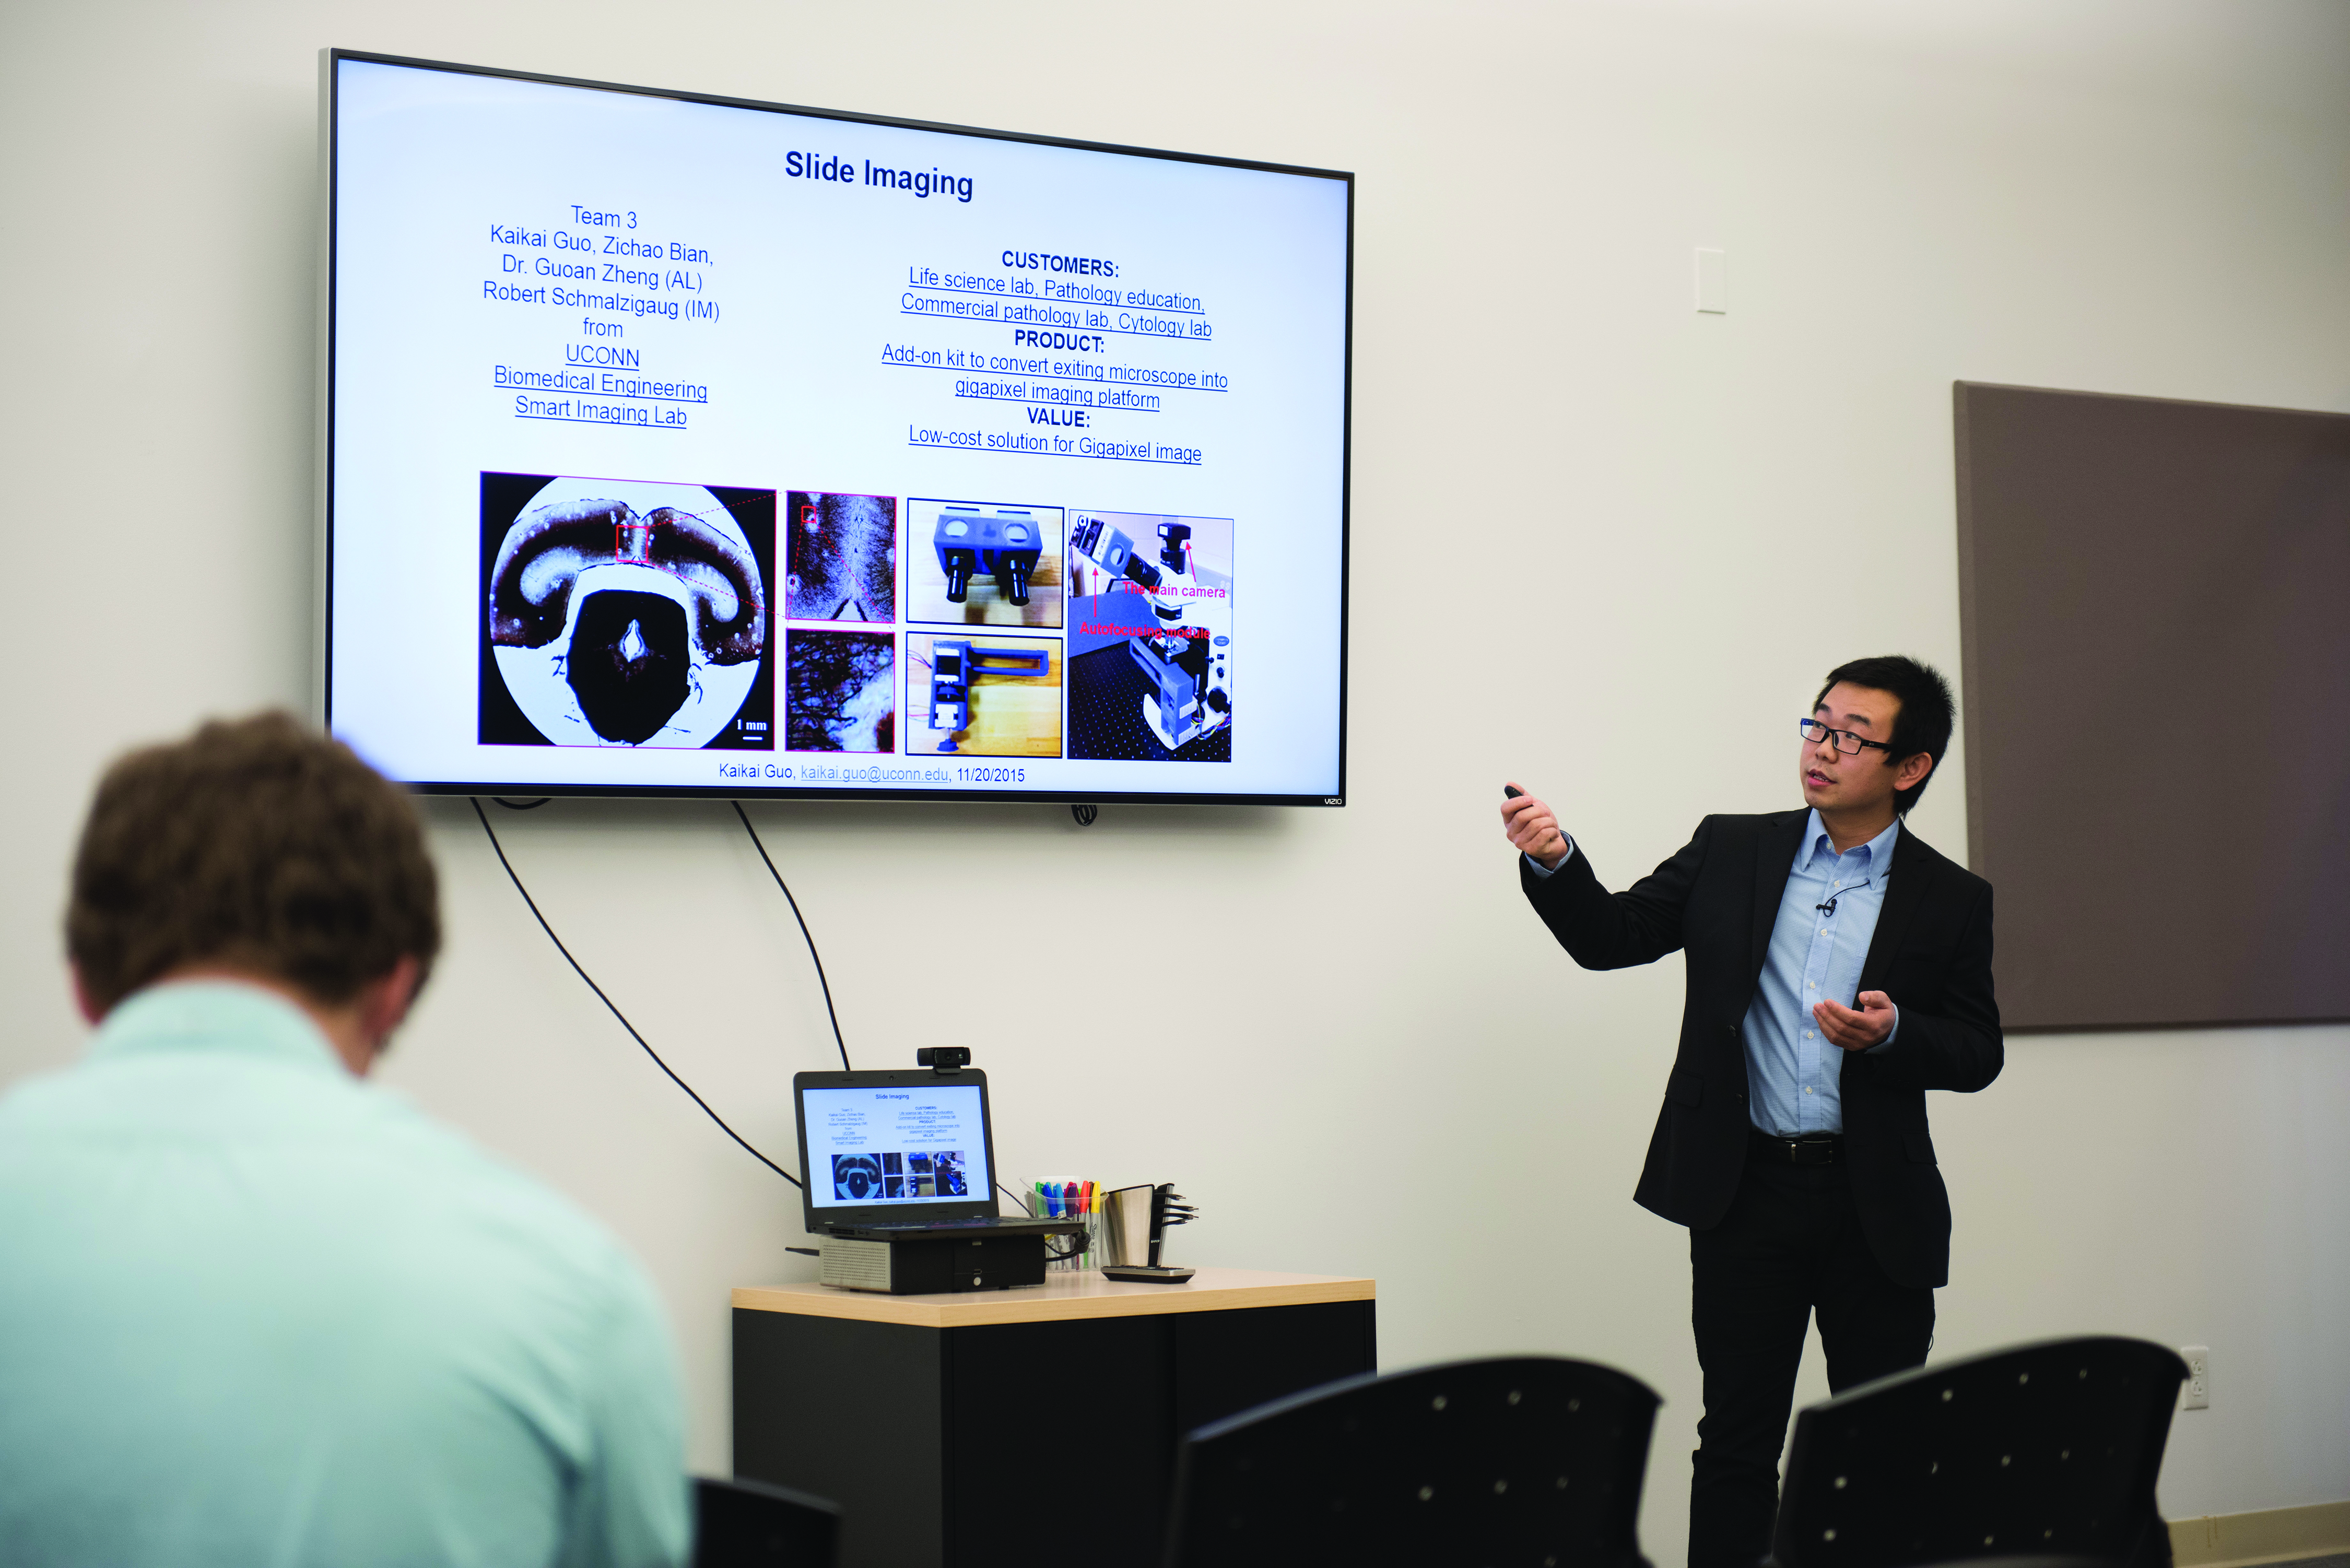 Kai Kai Guo, a Ph.D. candidate in biomedical engineering presents insights gained about the market for digital microscopy, and plans to bring his technology to market at the conclusion of Accelerate UConn.